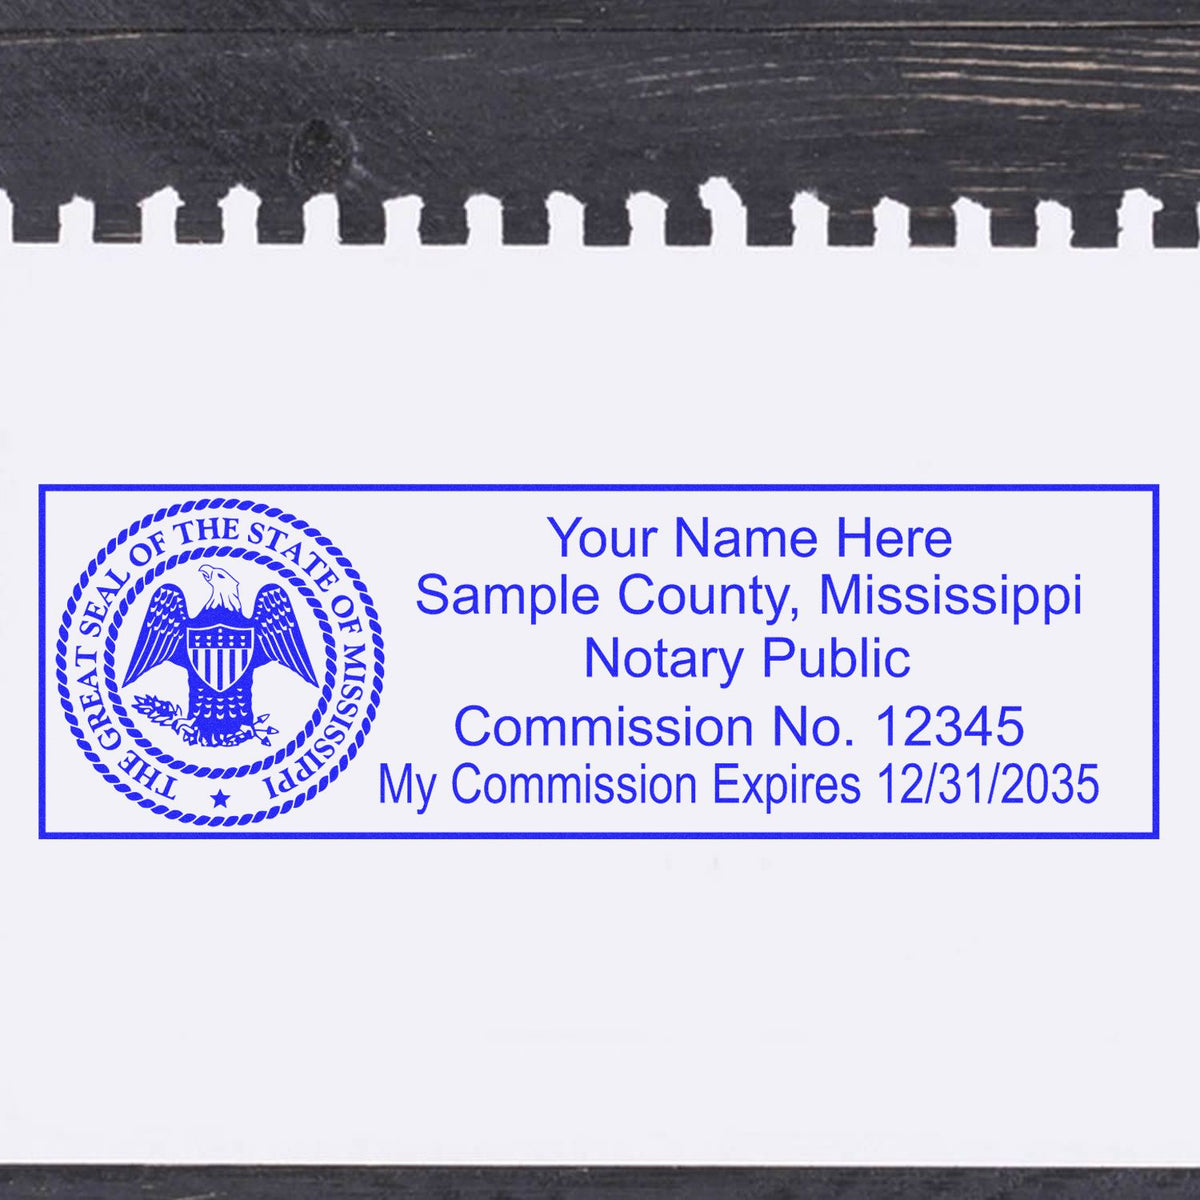 A photograph of the Heavy-Duty Mississippi Rectangular Notary Stamp stamp impression reveals a vivid, professional image of the on paper.